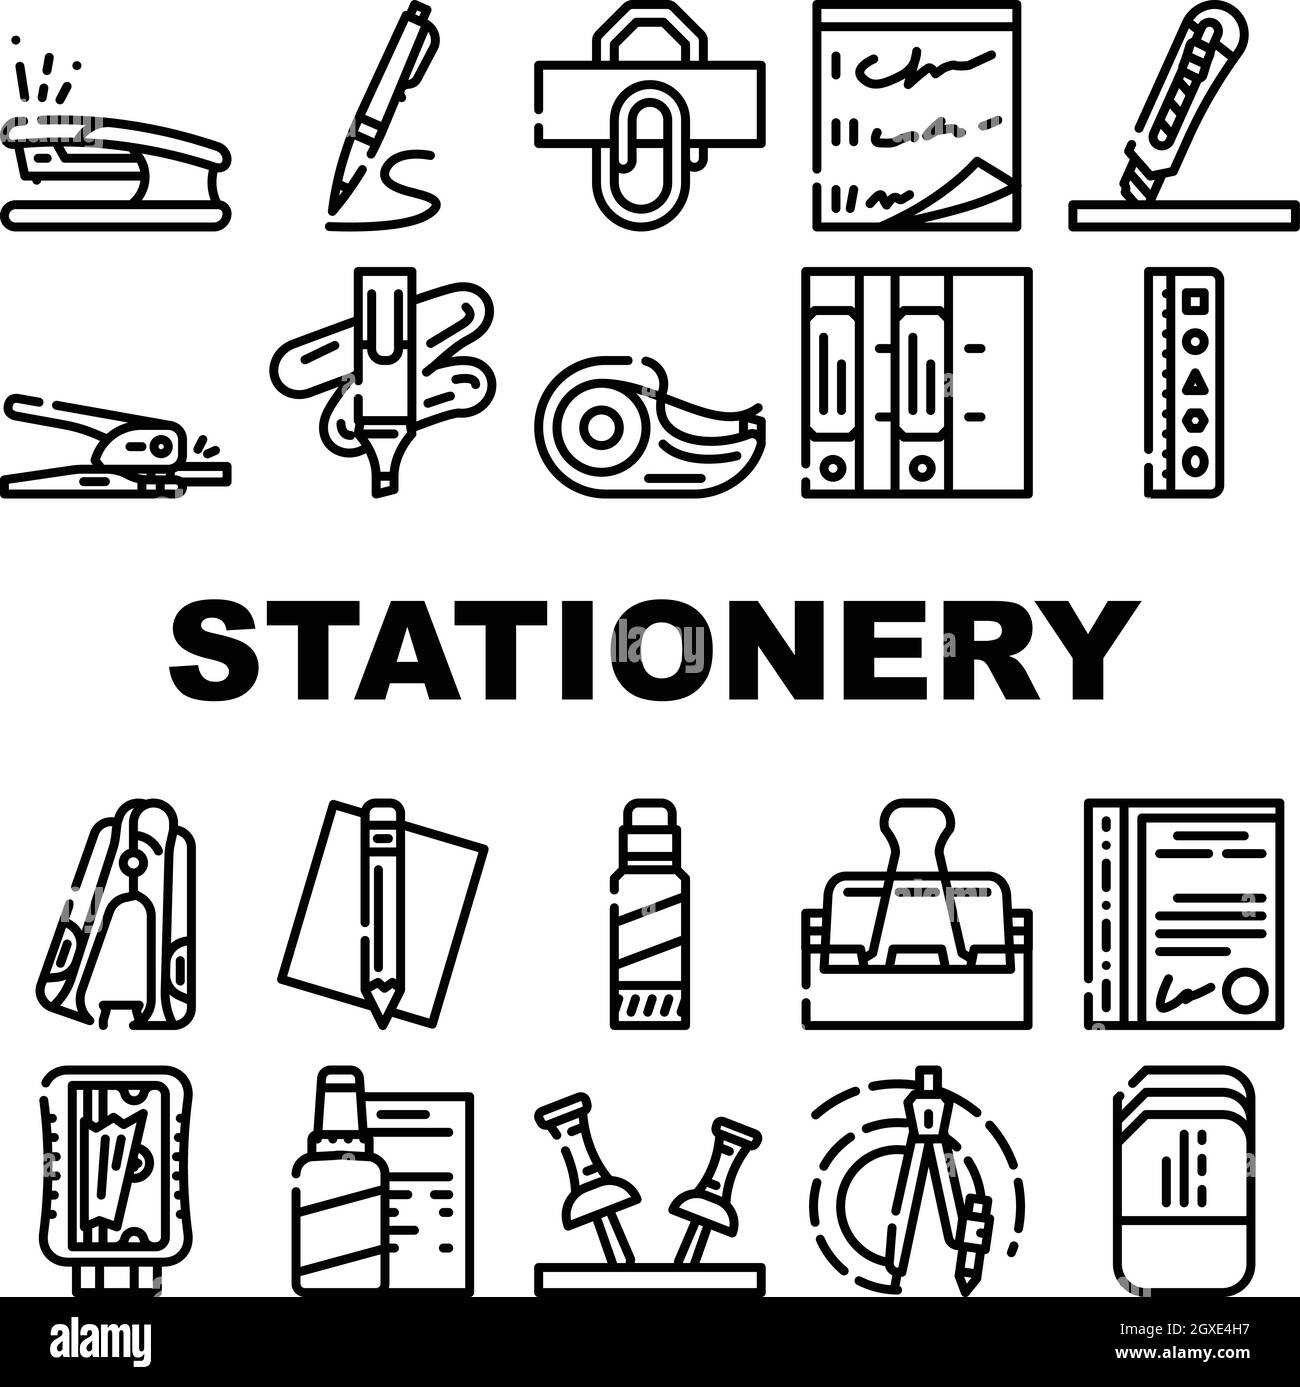 Stationery Equipment Collection Icons Set Vector Stock Vector